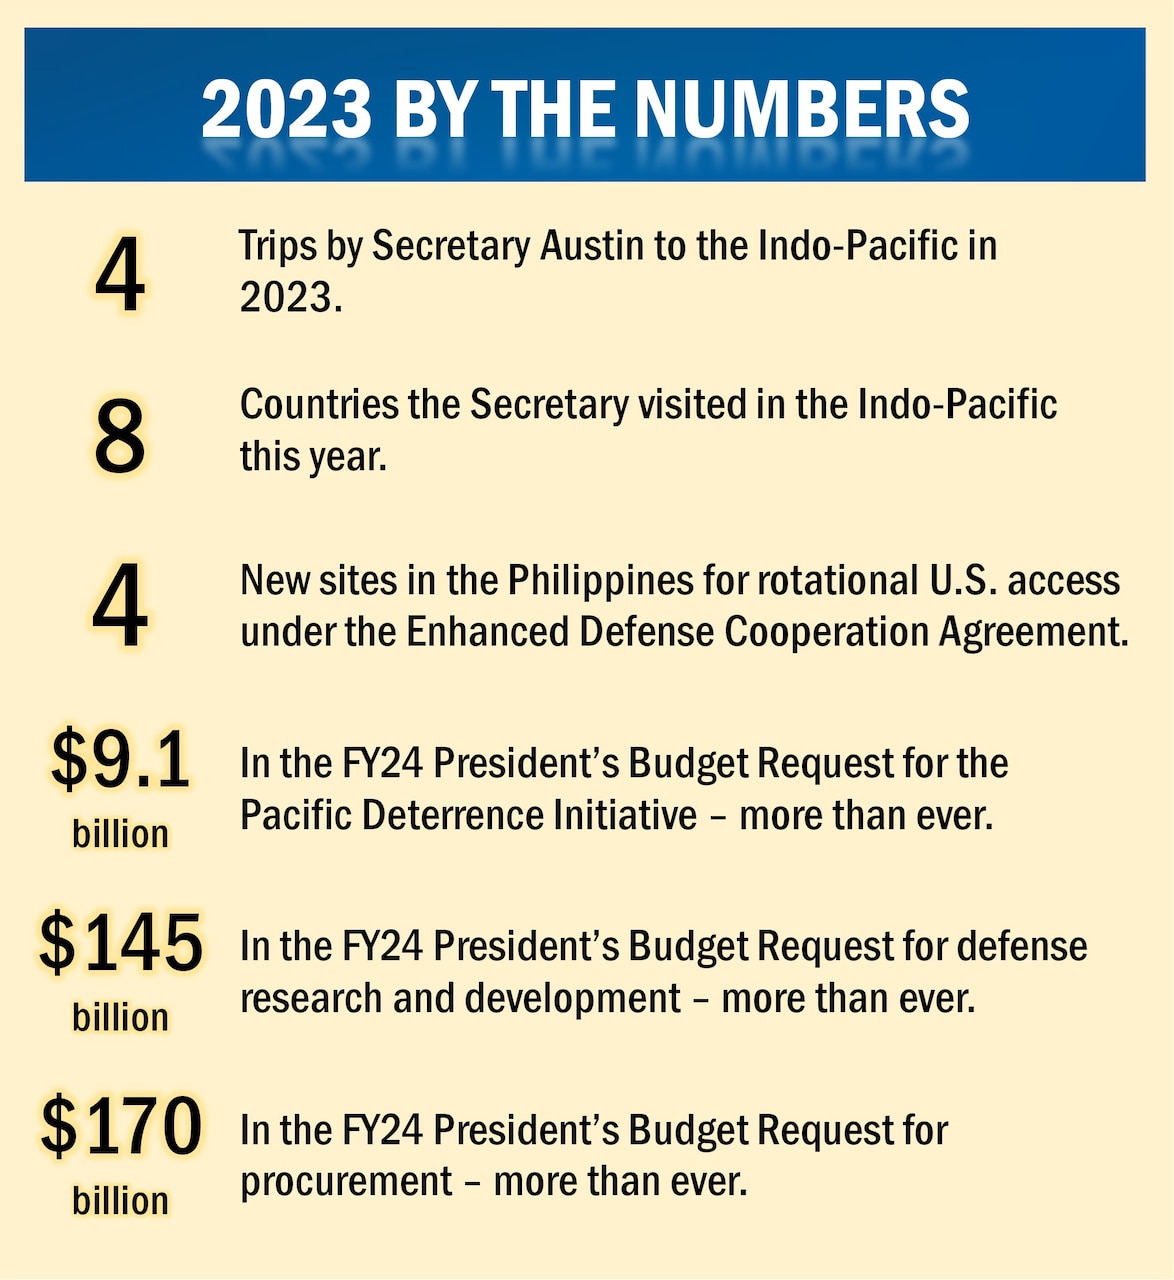 List of achievements in Indo-Pacific